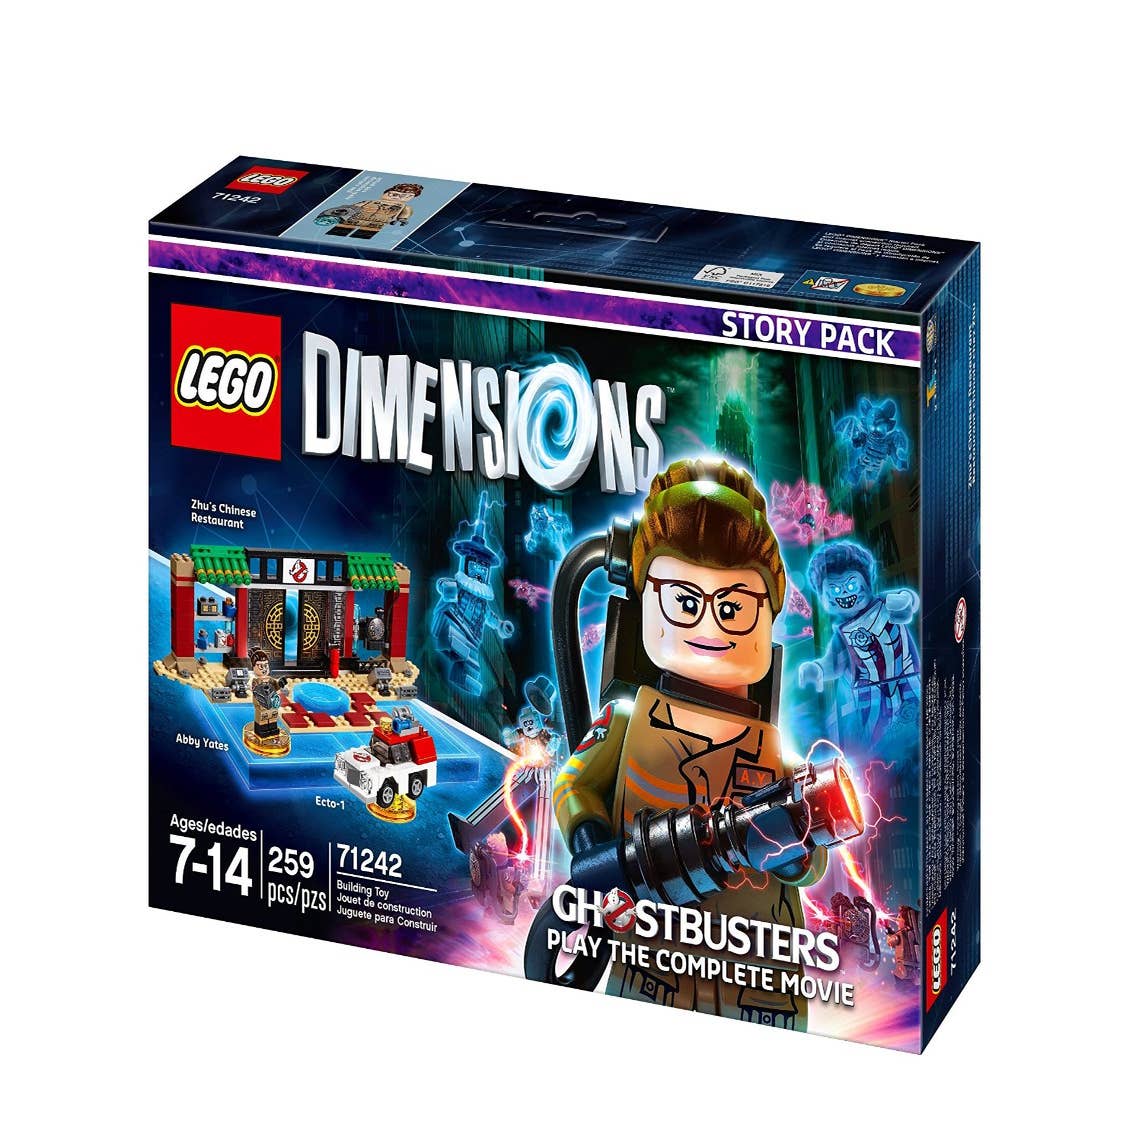 Future 'Lego Dimensions' packs will work with the originals